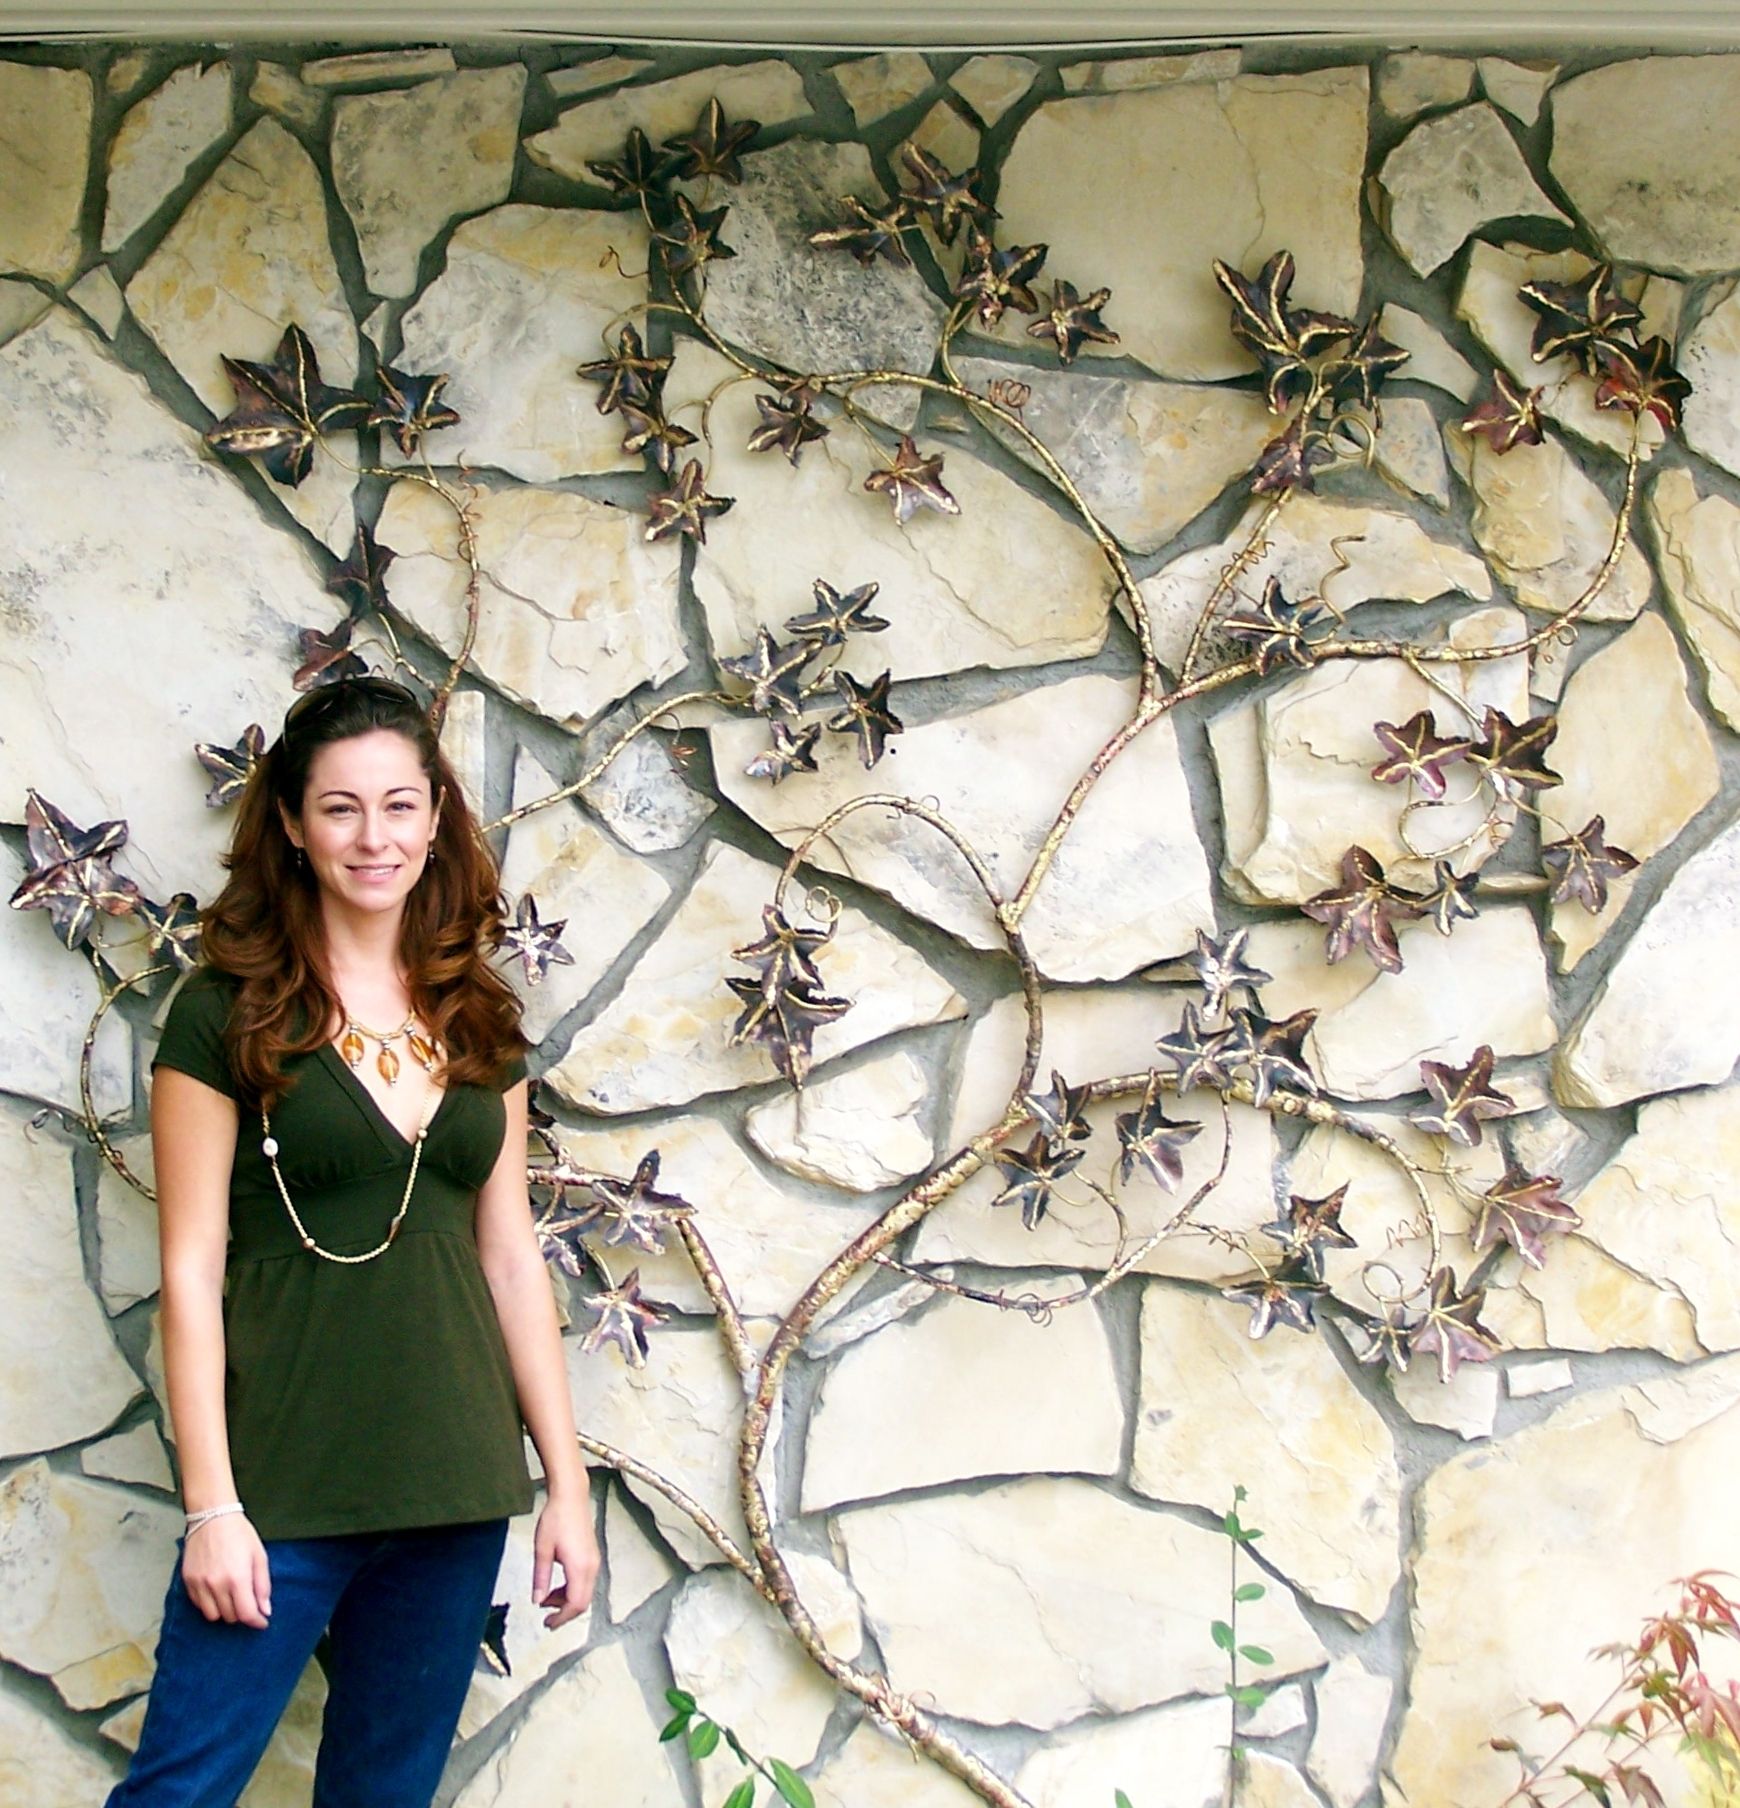 Copper Outdoor Wall Art In Popular Wall Art Ideas Design : Creative Grapevines Copper Outdoor Wall (View 8 of 15)